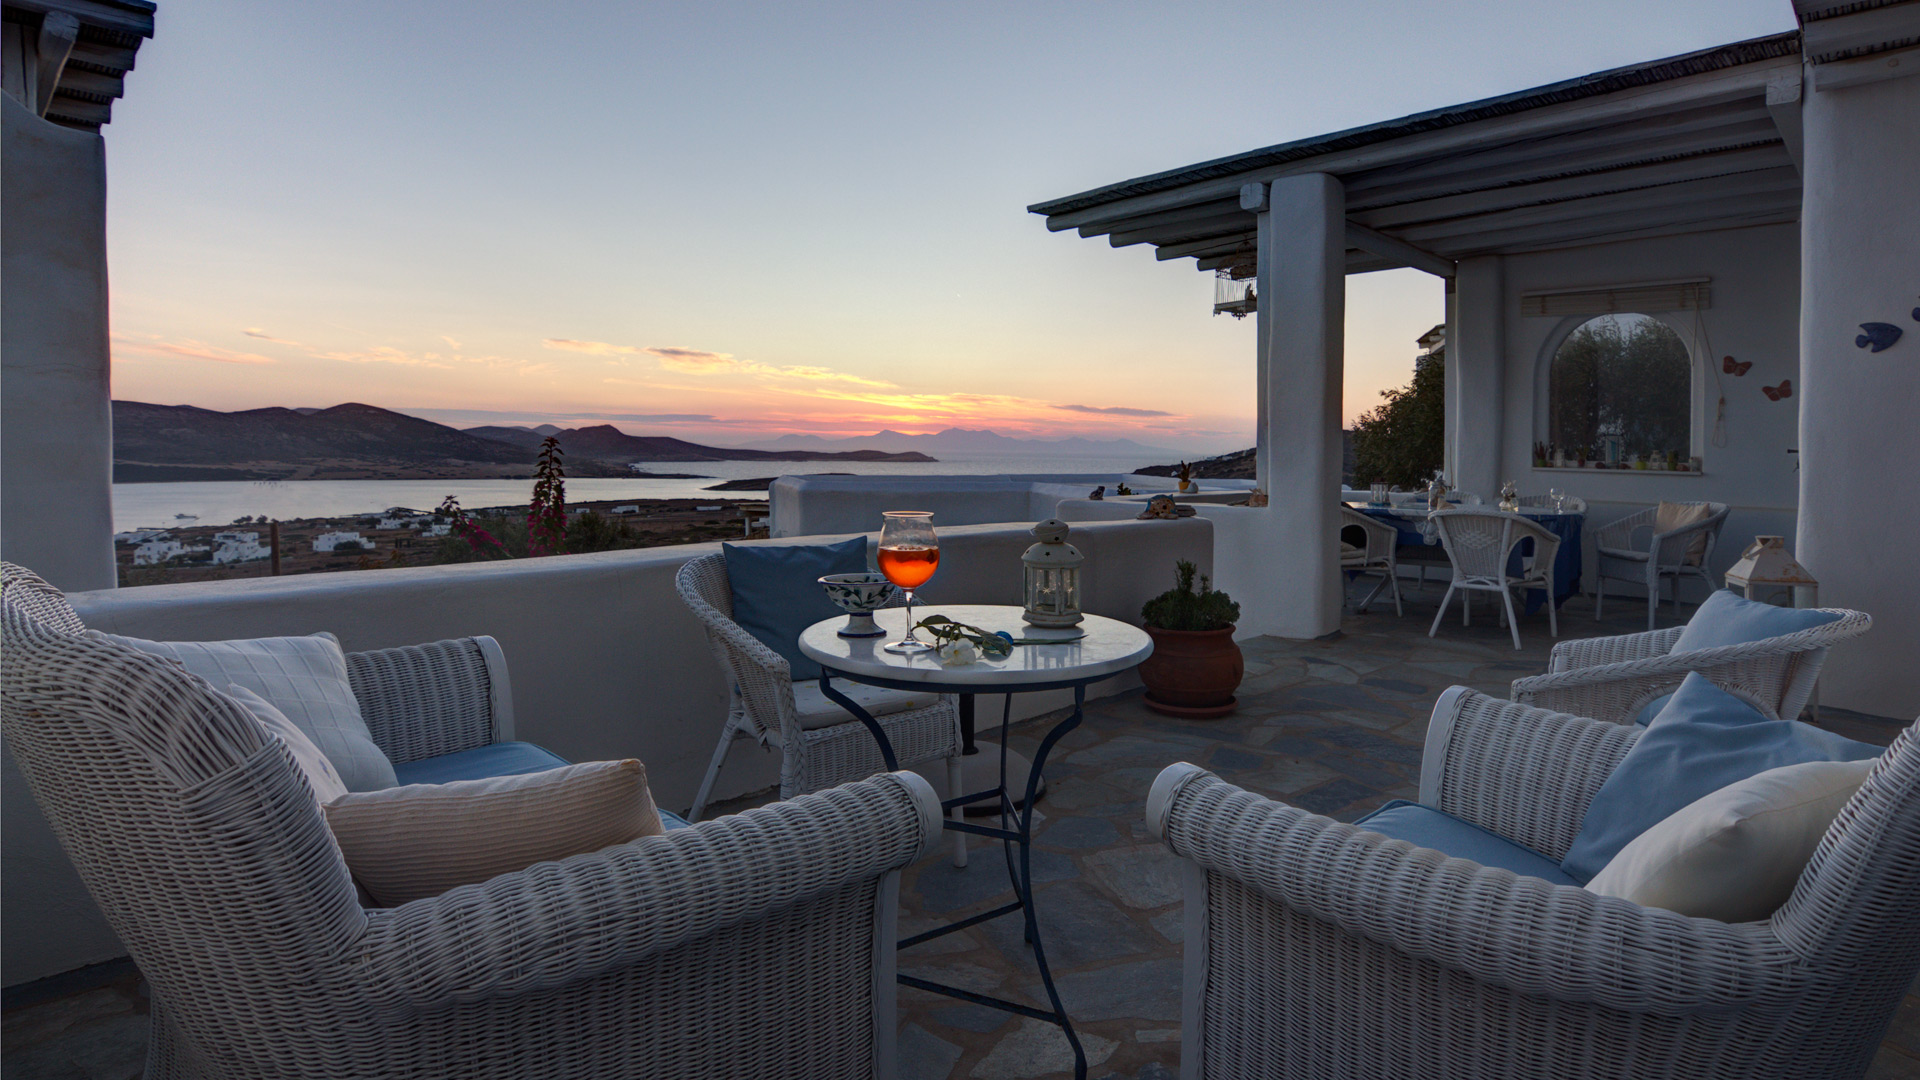 Secret House for 6 guests – Lilly's Villas Antiparos